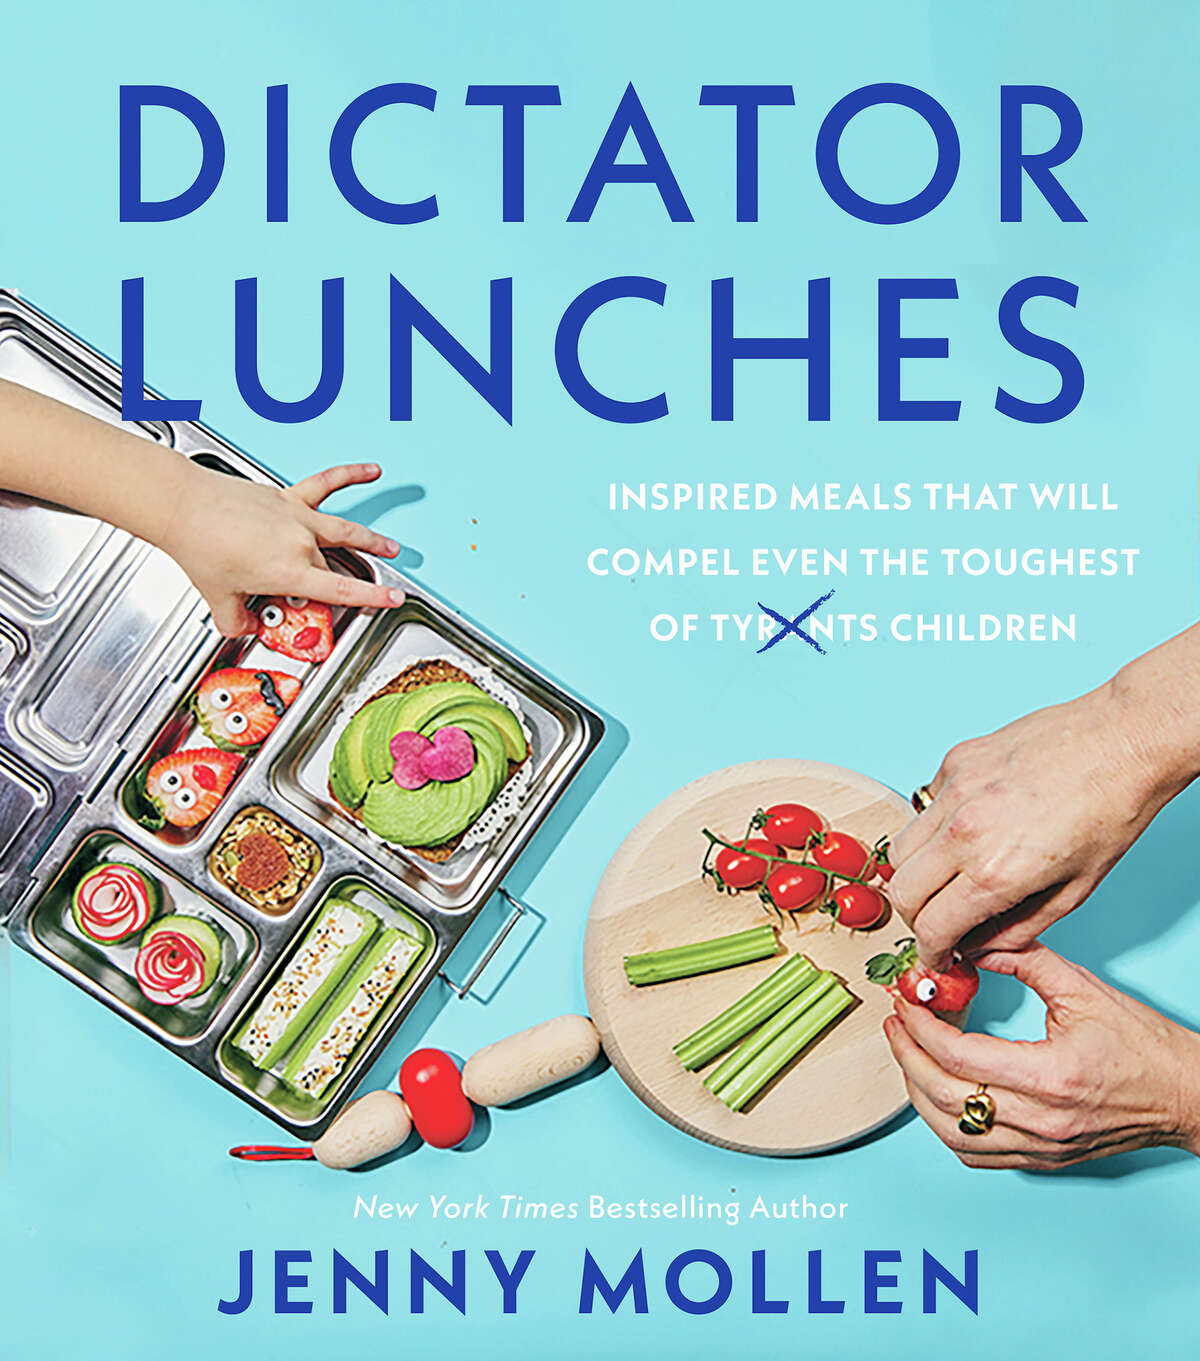 "Dictator Lunches: Inspired Meals That Will Compel Even the Toughest of Children" by Jenny Mollen take a fun, relaxed approach to school lunches.